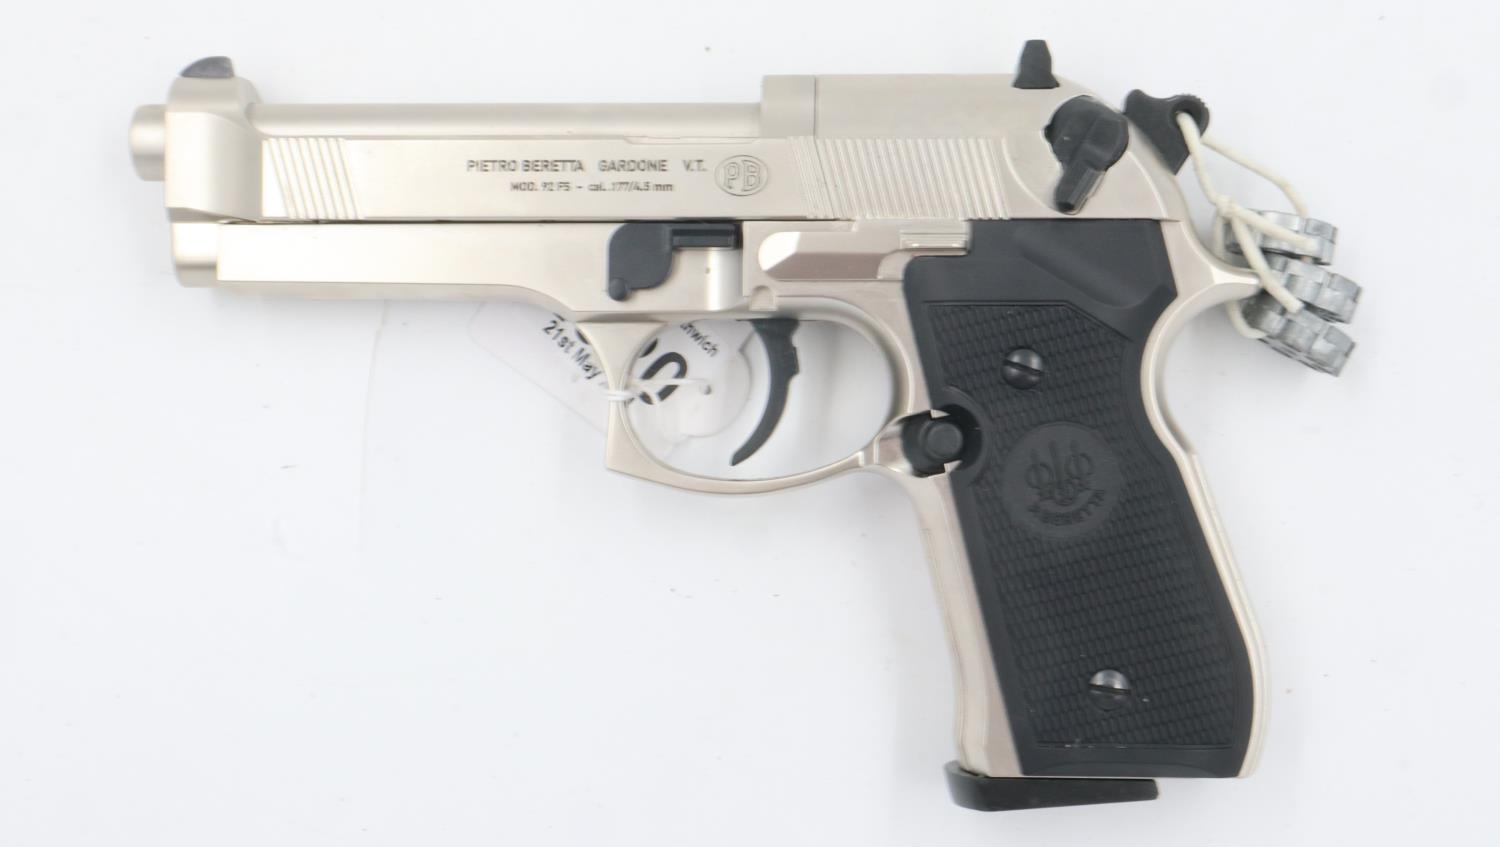 .177 Beretta pistol with CO2 cartridges. UK P&P Group 1 (£16+VAT for the first lot and £2+VAT for